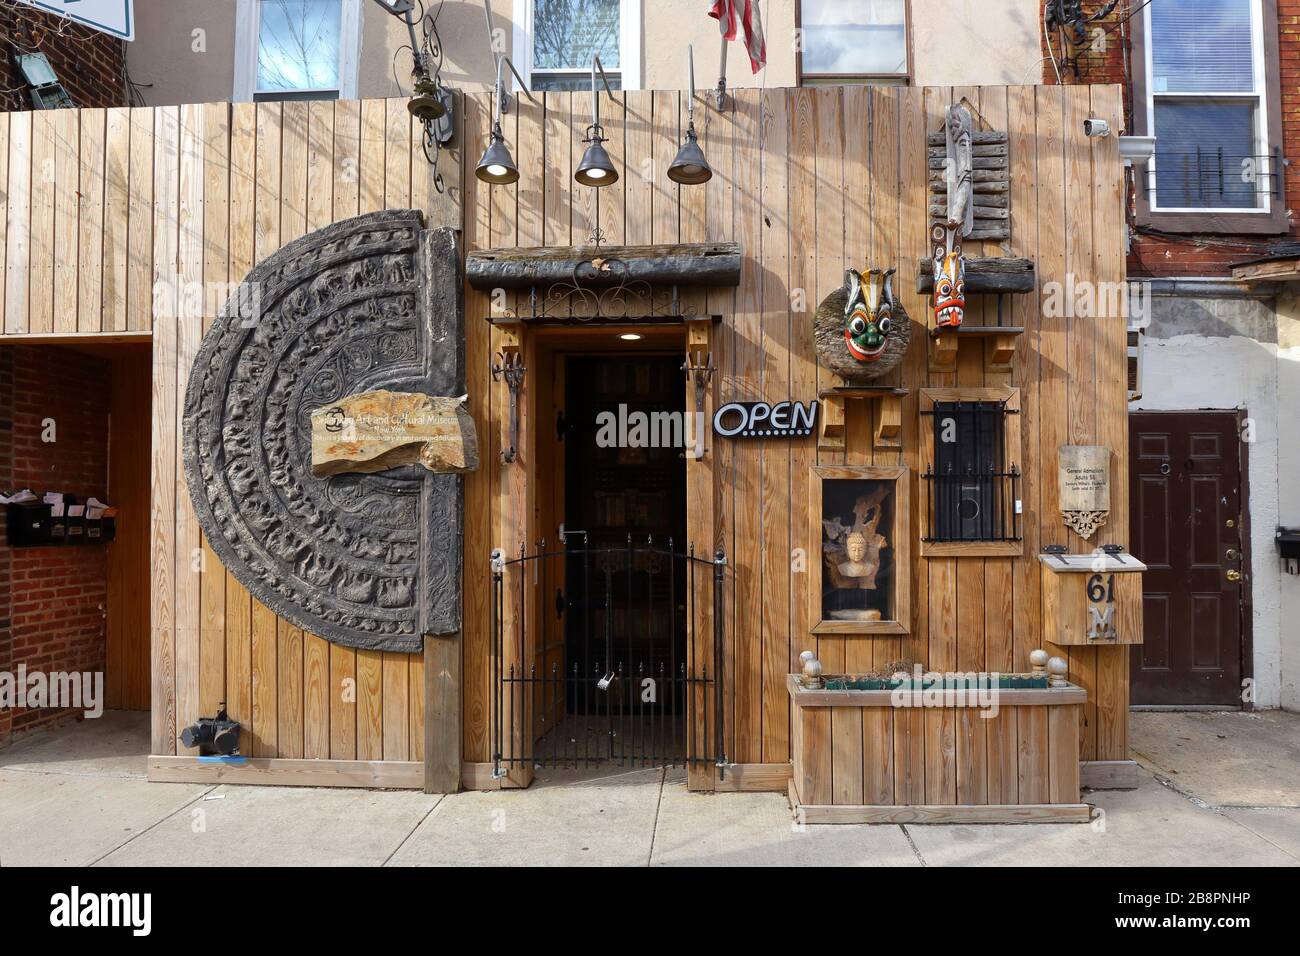 Sri Lankan Art & Cultural Museum, 61 Canal St, Staten Island, NY. exterior storefront of a cultural museum in Stapleton. Stock Photo